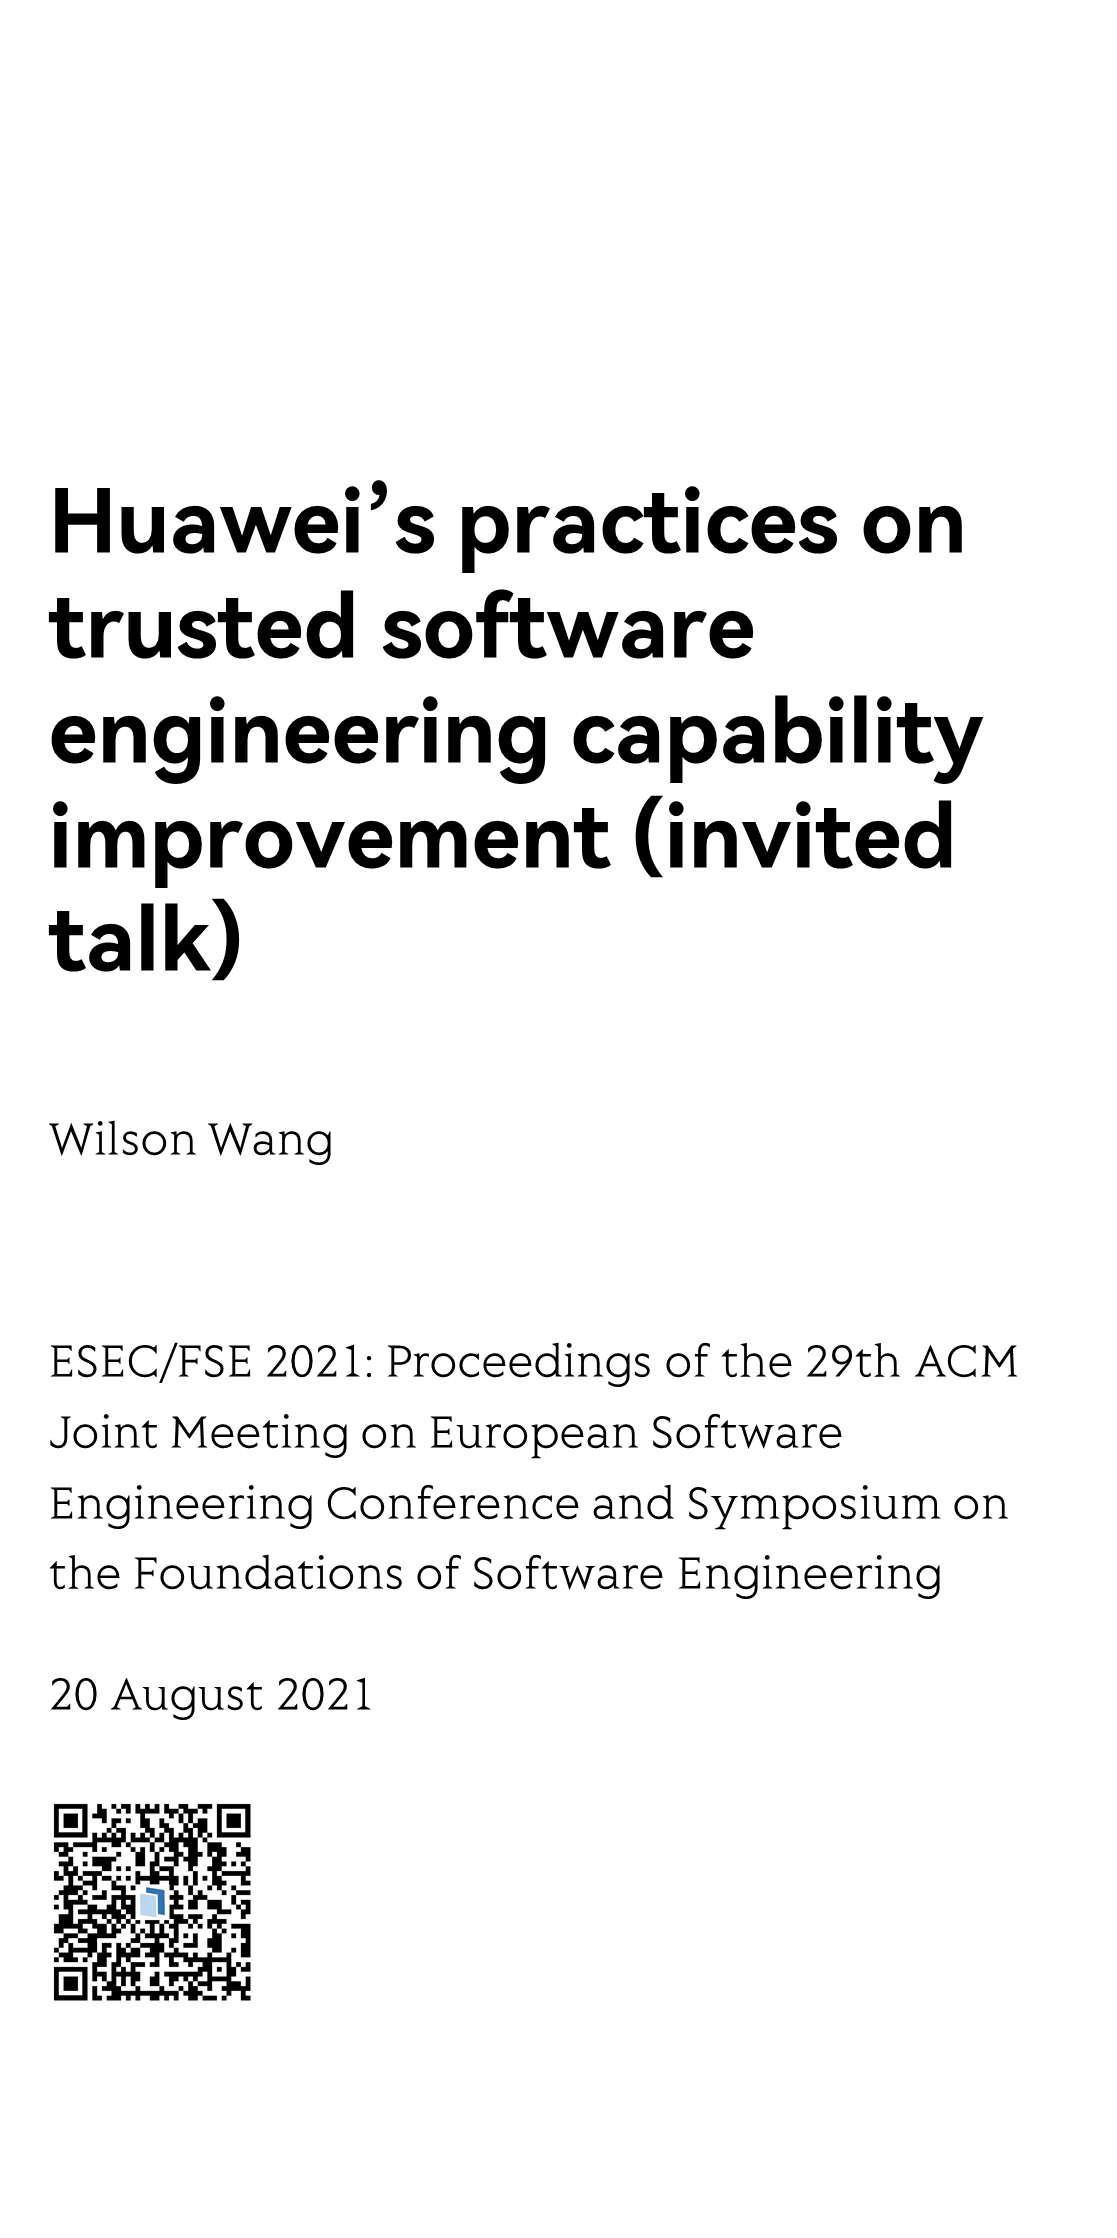 ESEC/FSE 2021: Proceedings of the 29th ACM Joint Meeting on European Software Engineering Conference and Symposium on the Foundations of Software Engineering_1